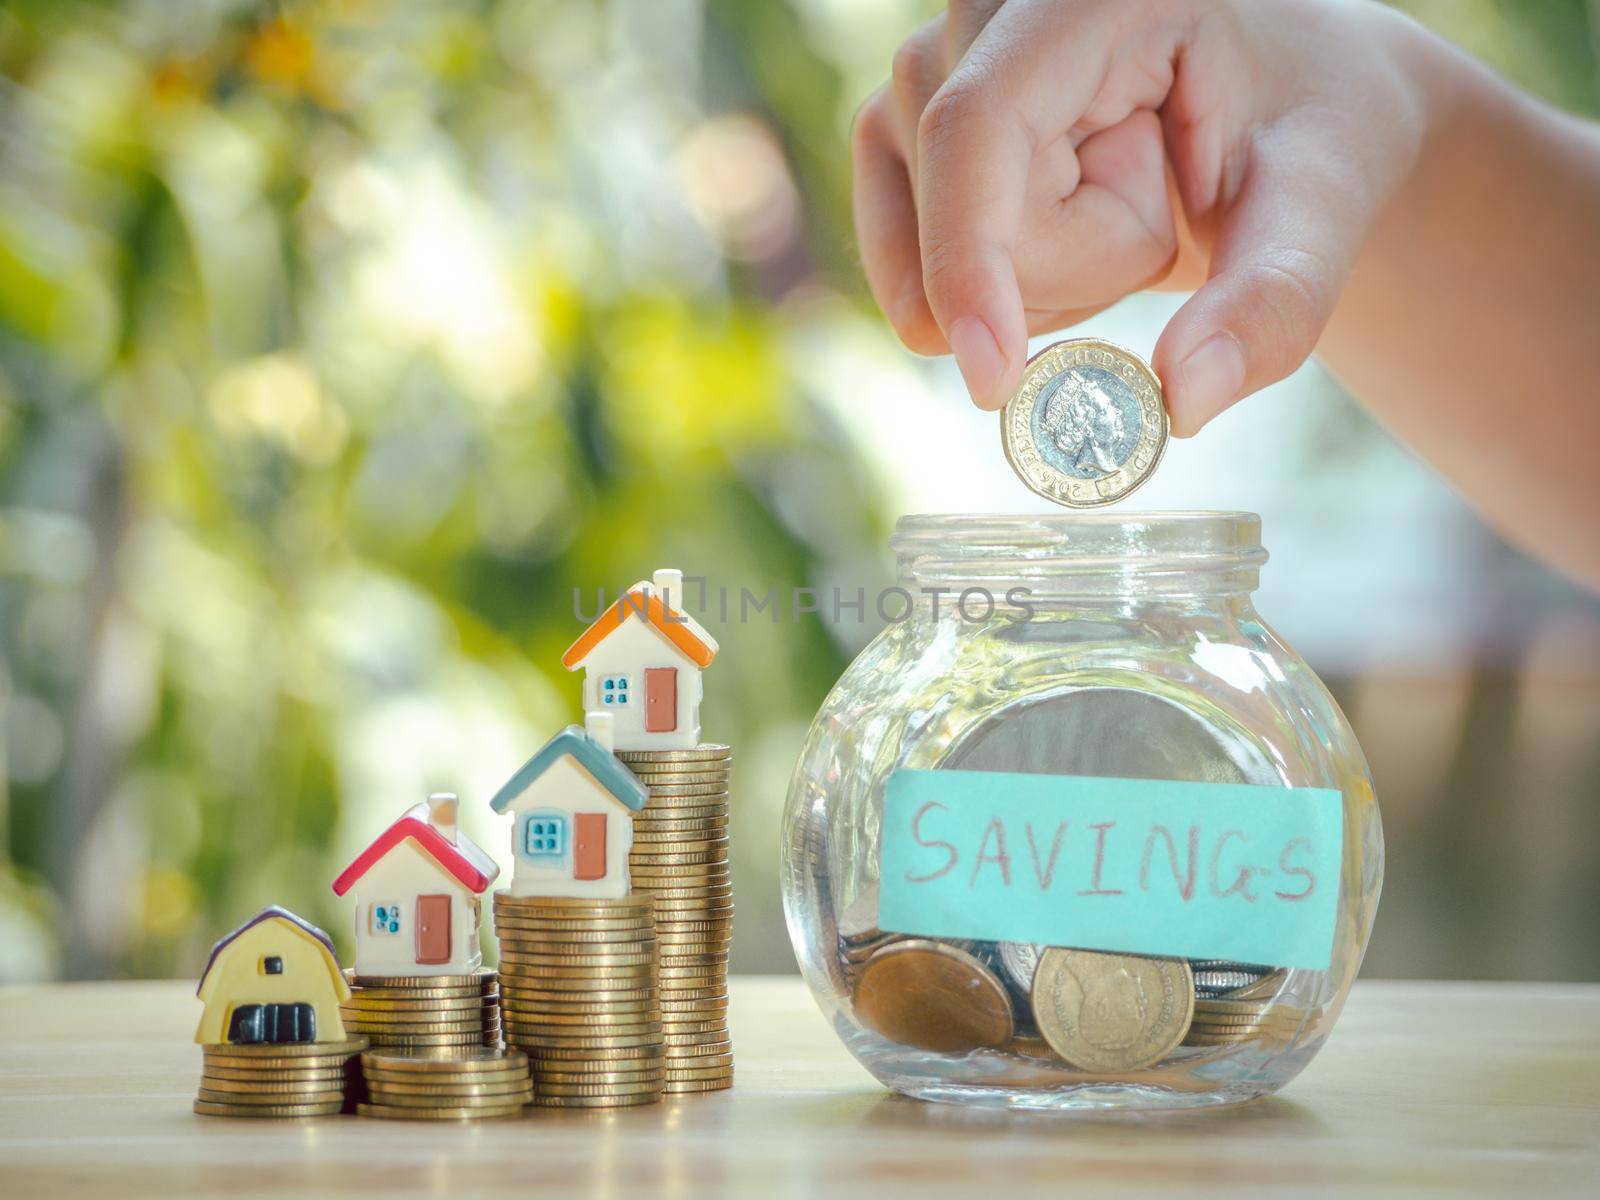 Asian boy holding coins drop a container saving money near home on gold coins stack to save money invest for future and buy home.Concept loan,property ladder,financial, real estate investment, bonus.